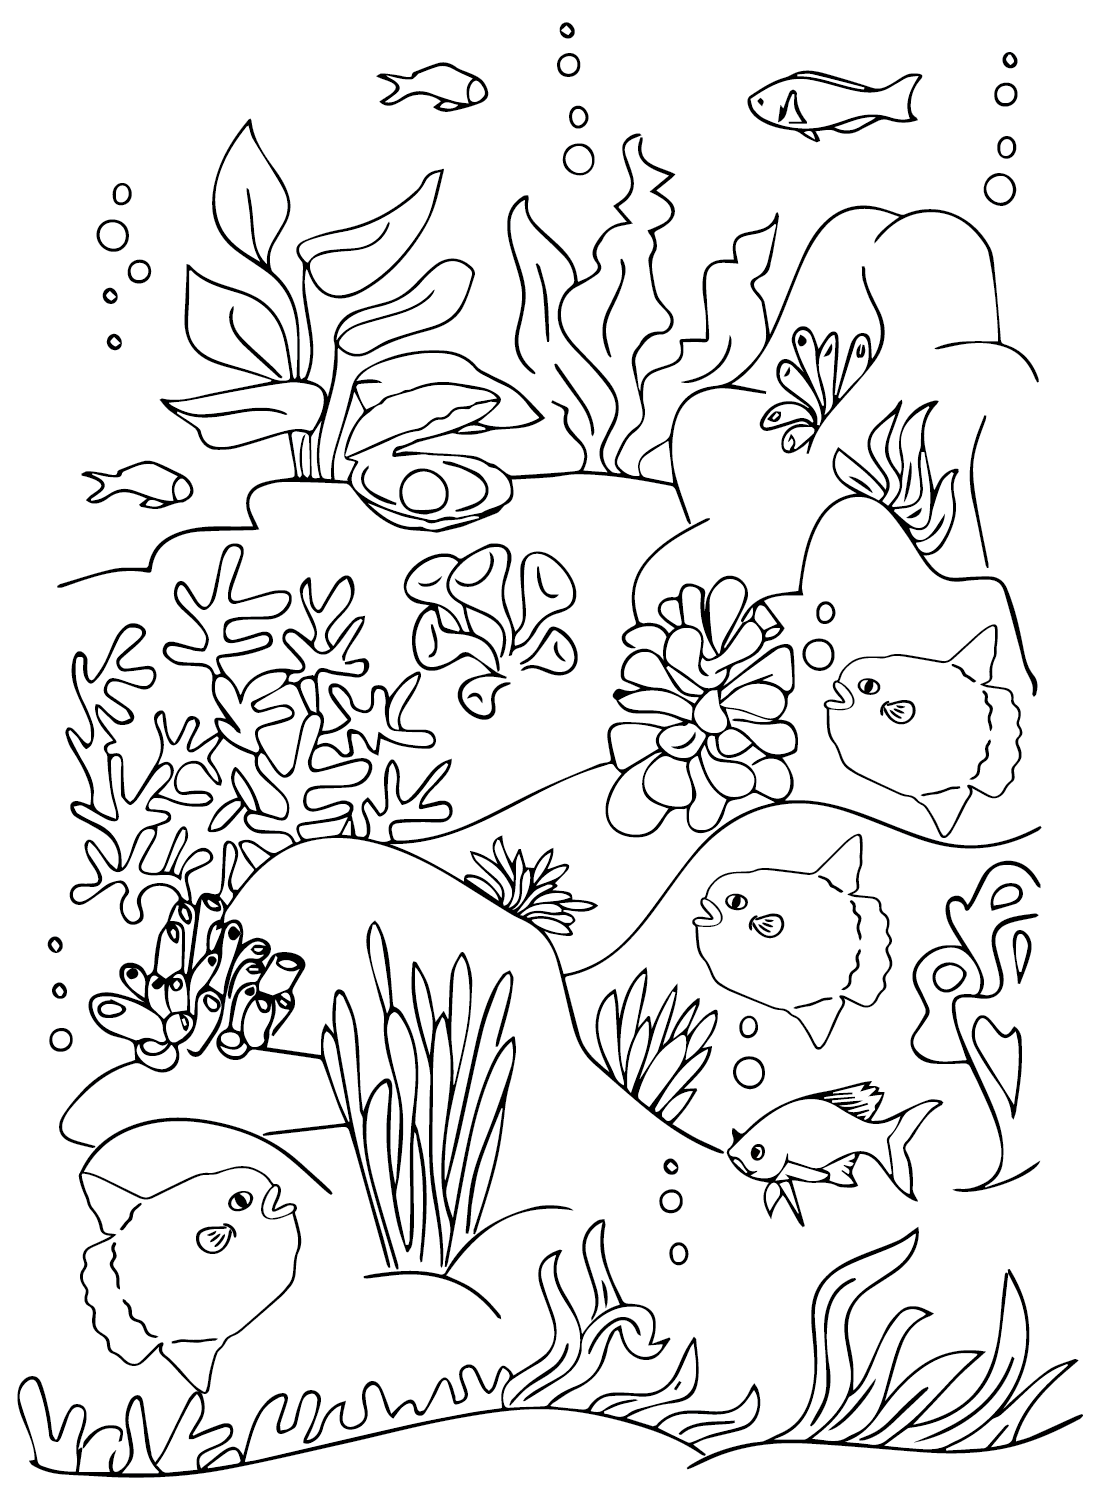 Ocean Sunfish Images Coloring Page - Free Printable Coloring Pages